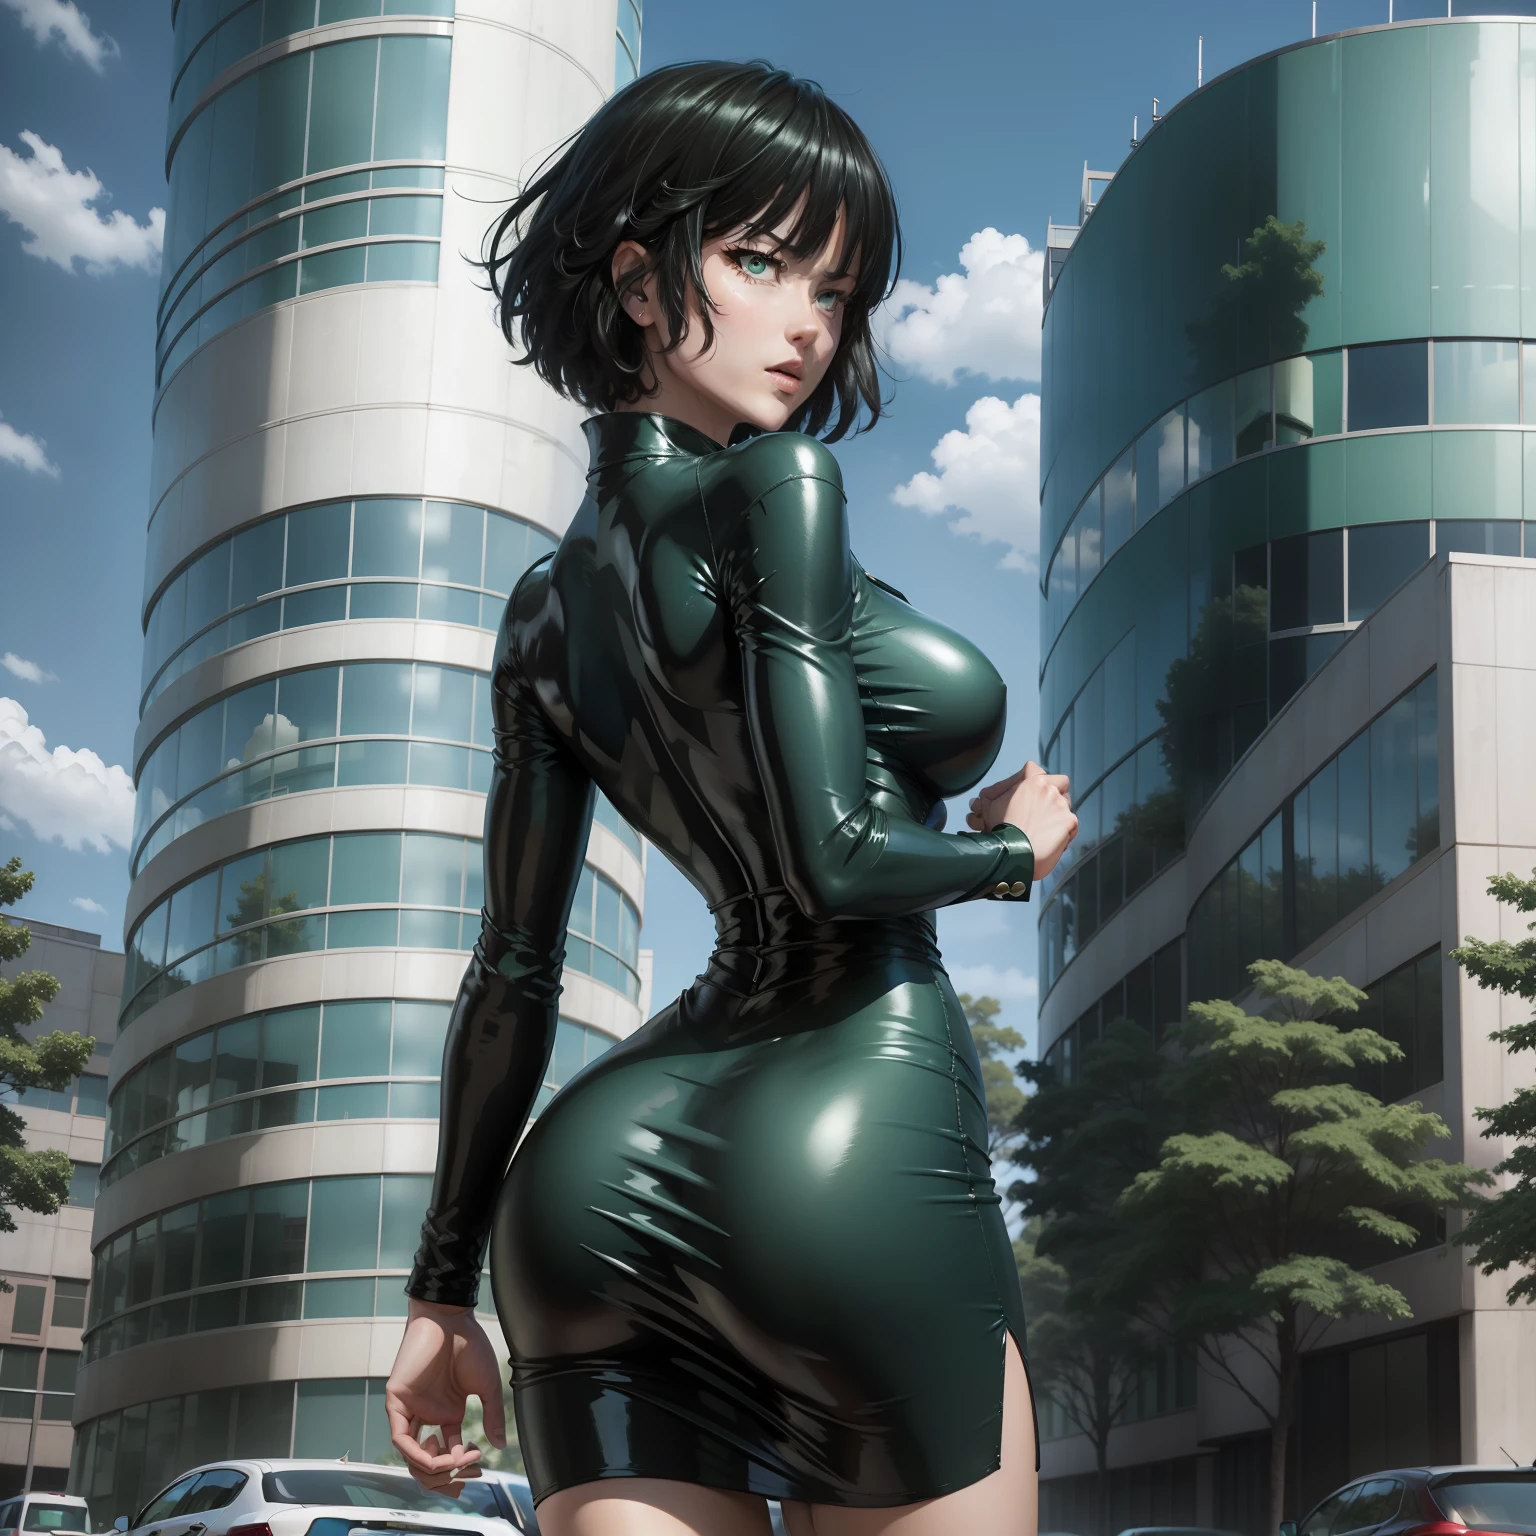 Fubuki in one punch man. Sexy. Green. Storm. Flying. Blue sky. Building, butt facing camera, back view, tight dress